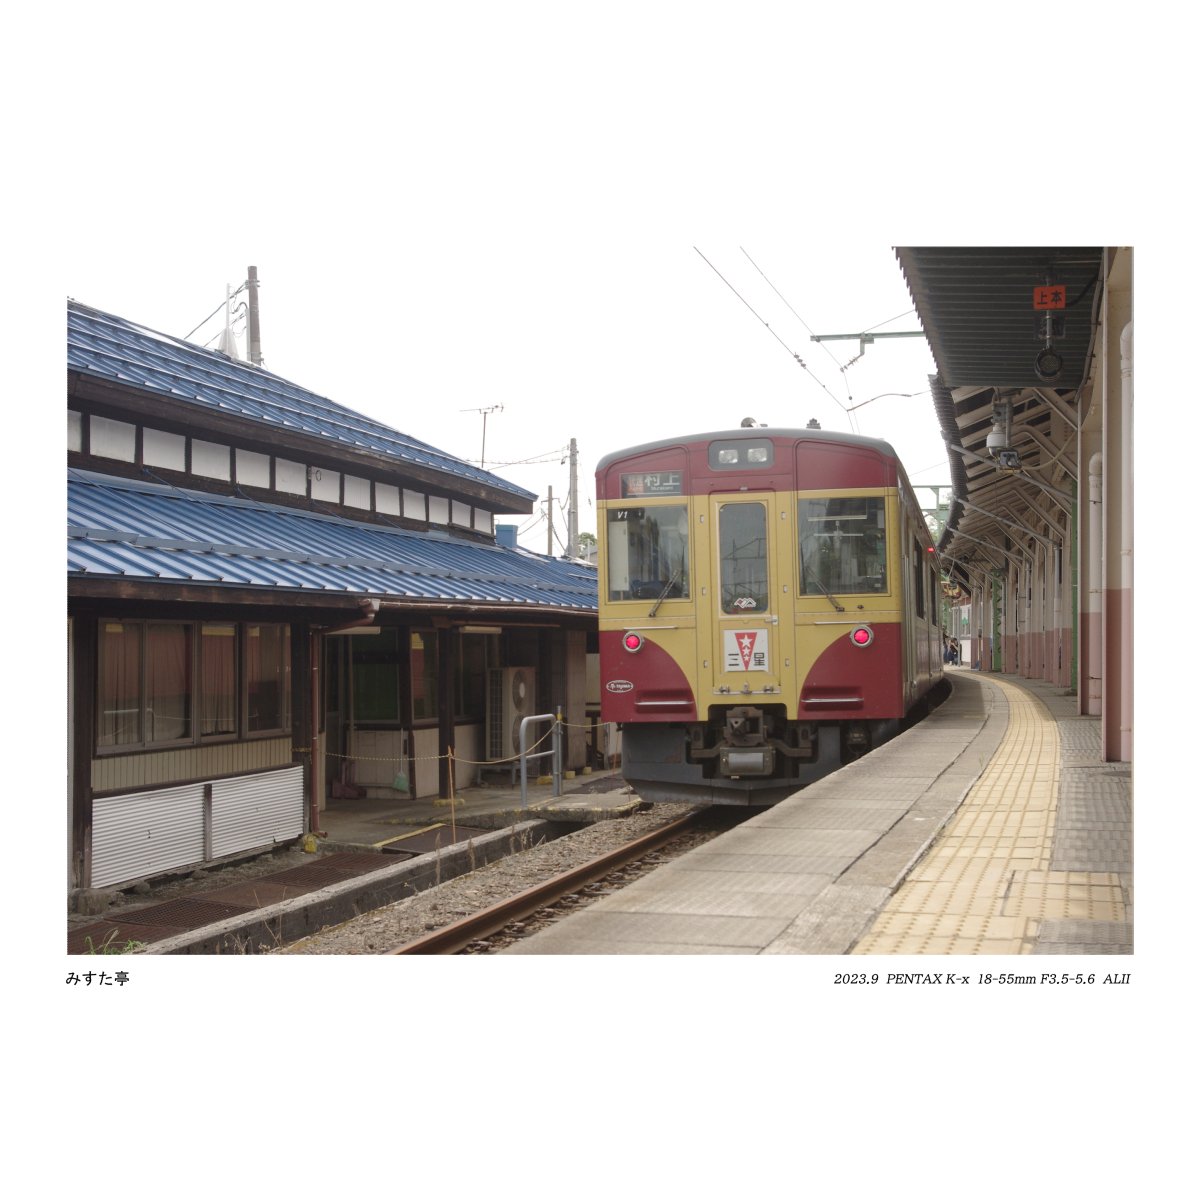 train no humans ground vehicle blurry train station scenery depth of field  illustration images